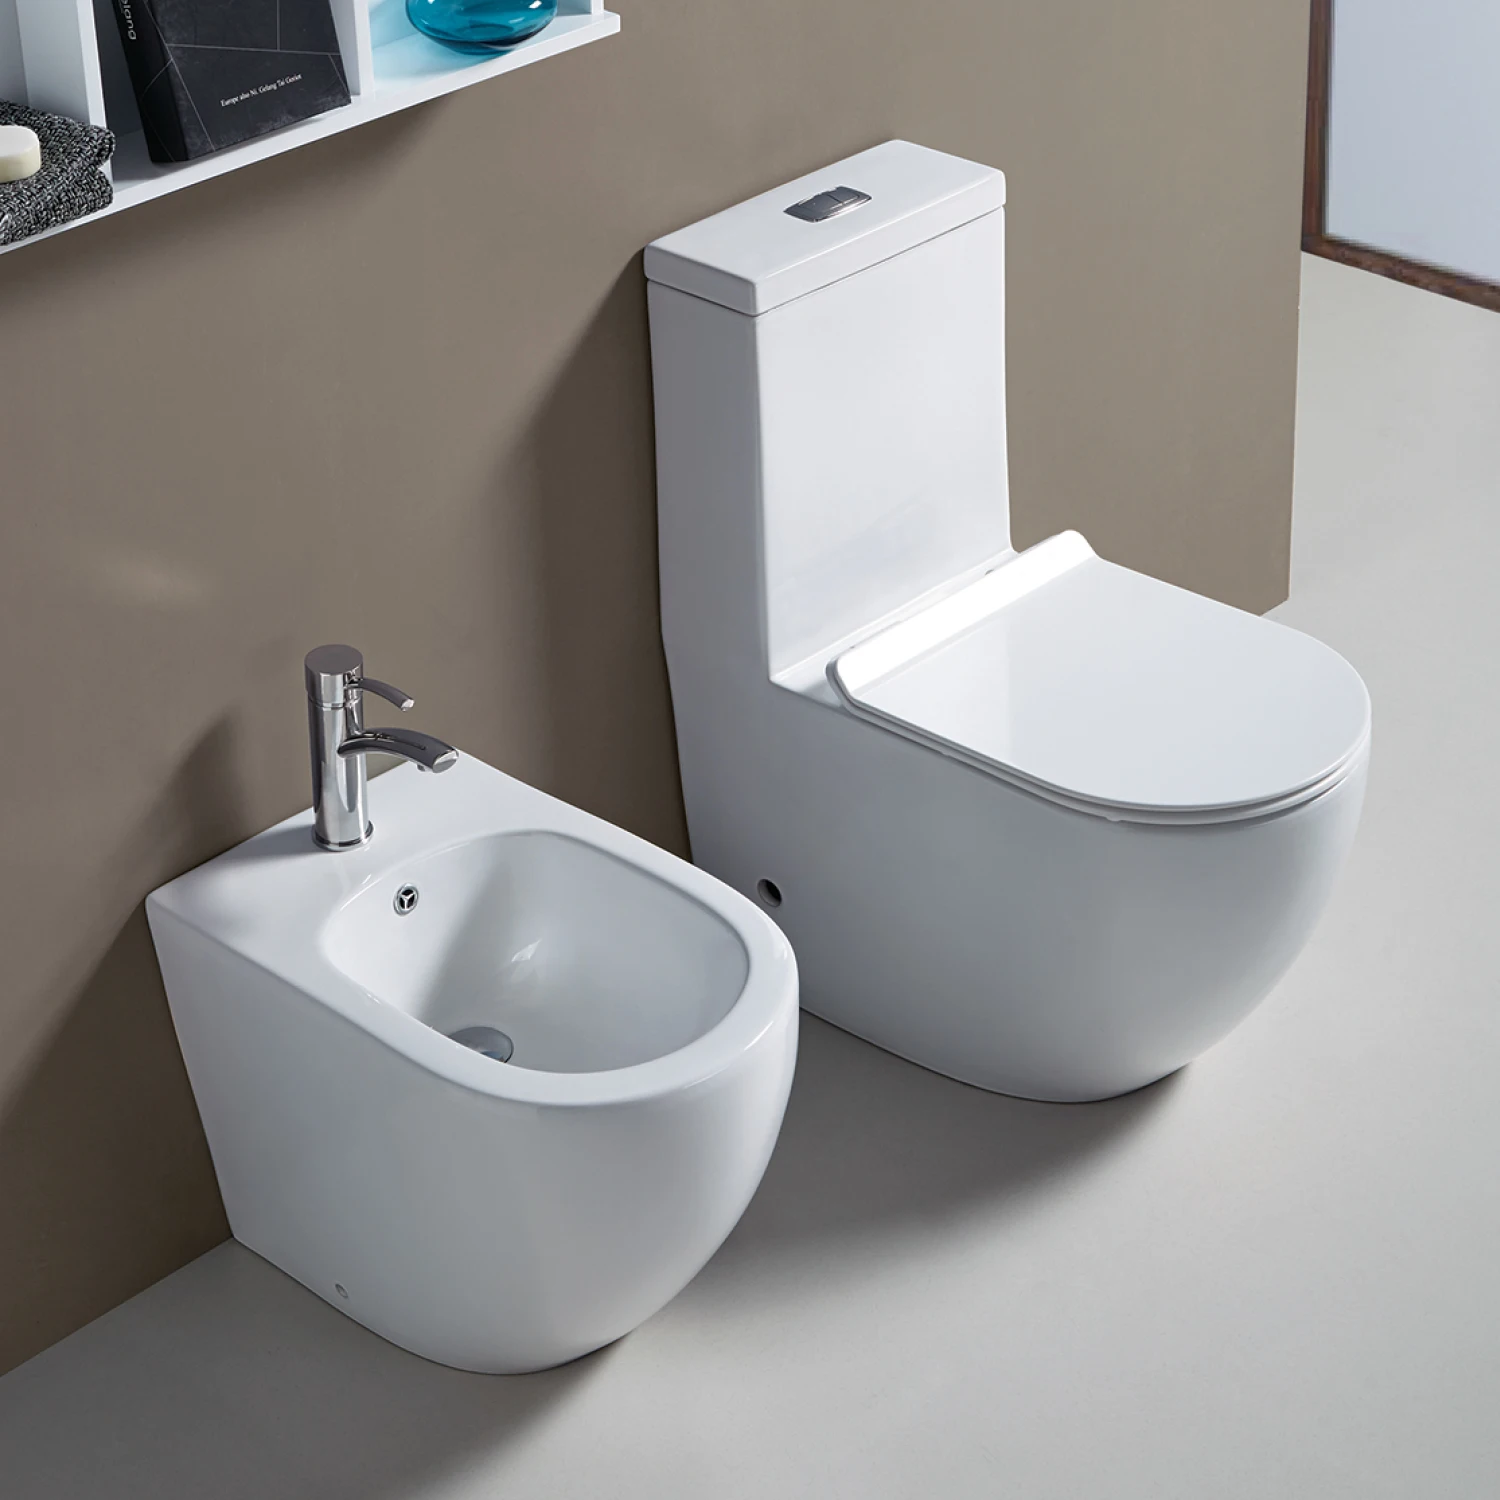 Dcbj A81 670 370 840 Mm Semicircle Bathroom One Piece Wc Toilets Buy Toilets One Piece Toilets Bathroom Toilets Product On Alibaba Com